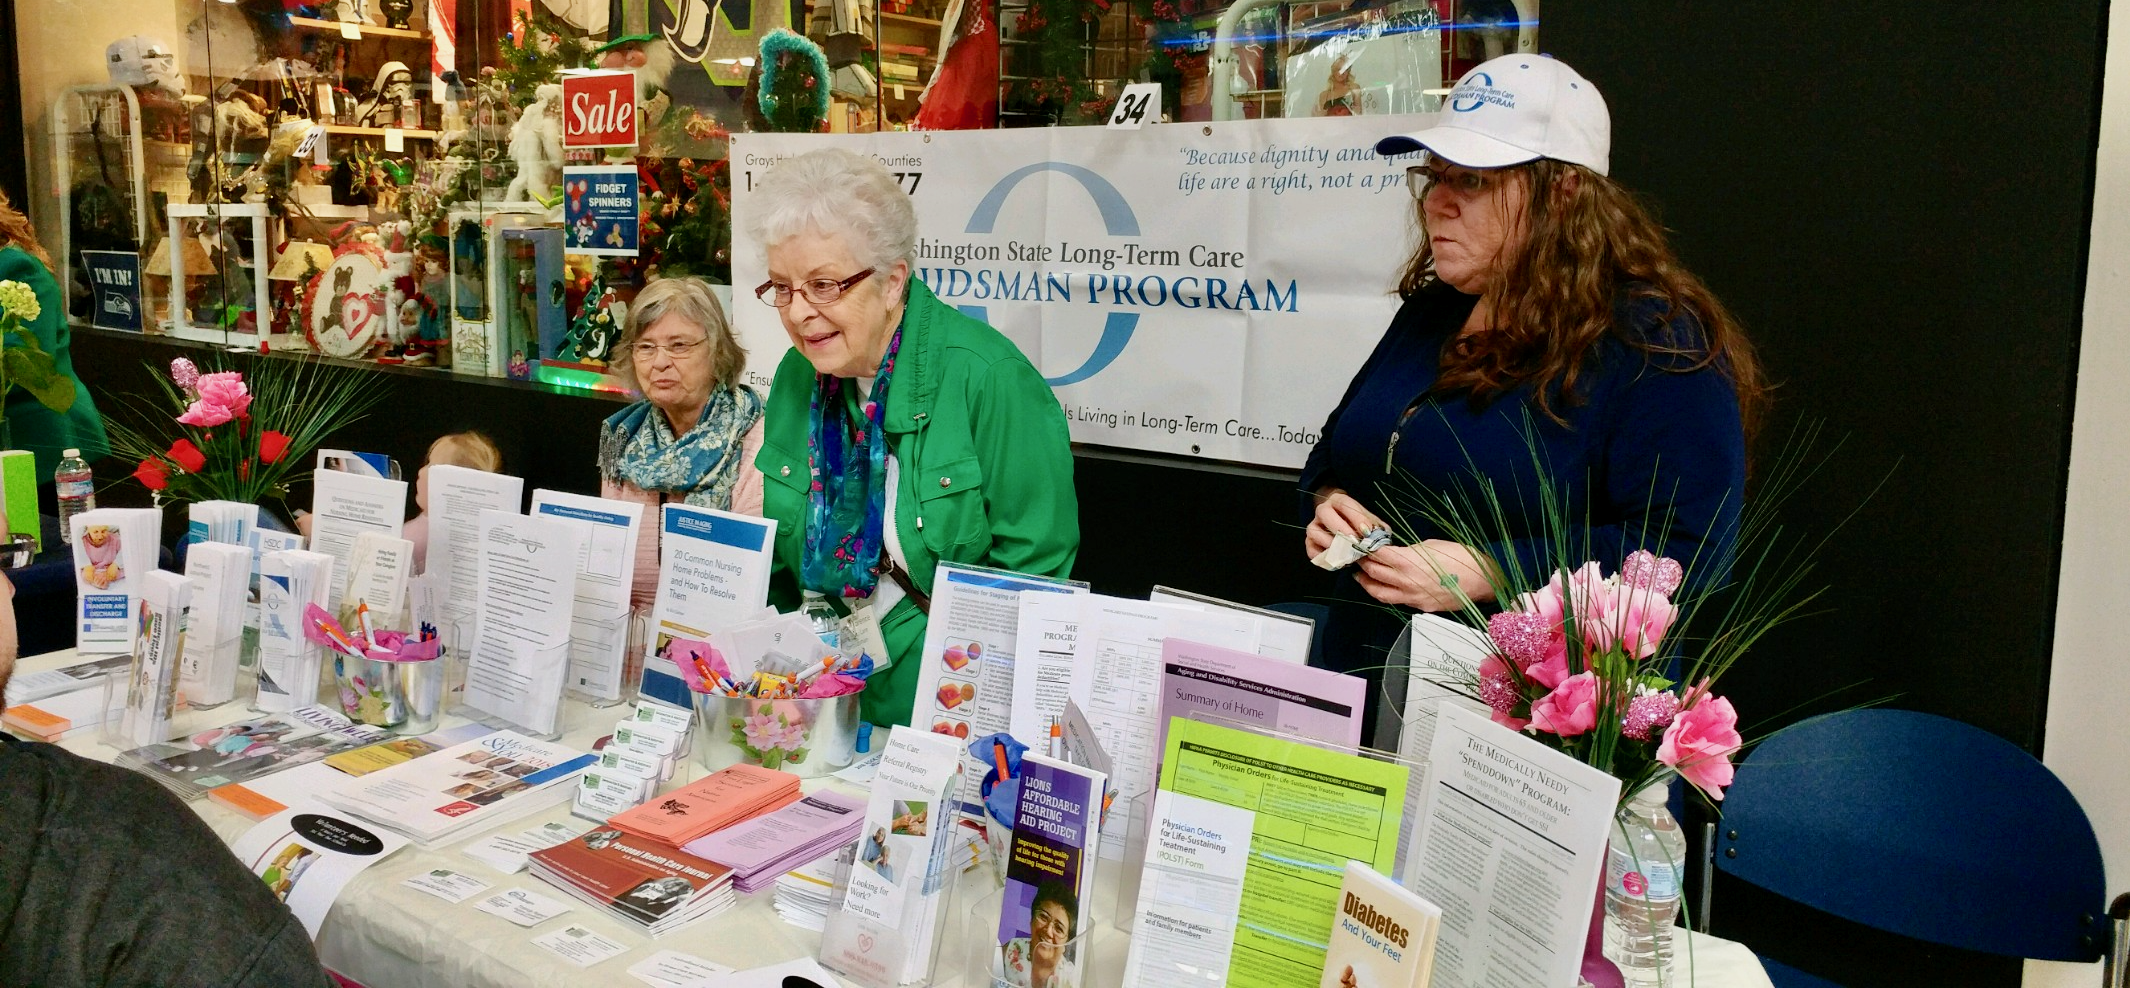 A group of three woman are standing behind an informational booth for the Washington State Long-Term Care Ombudsman Program. One woman is wearing a white hat with the logo, and the other two are speaking to people not pictured on the other side of the table.